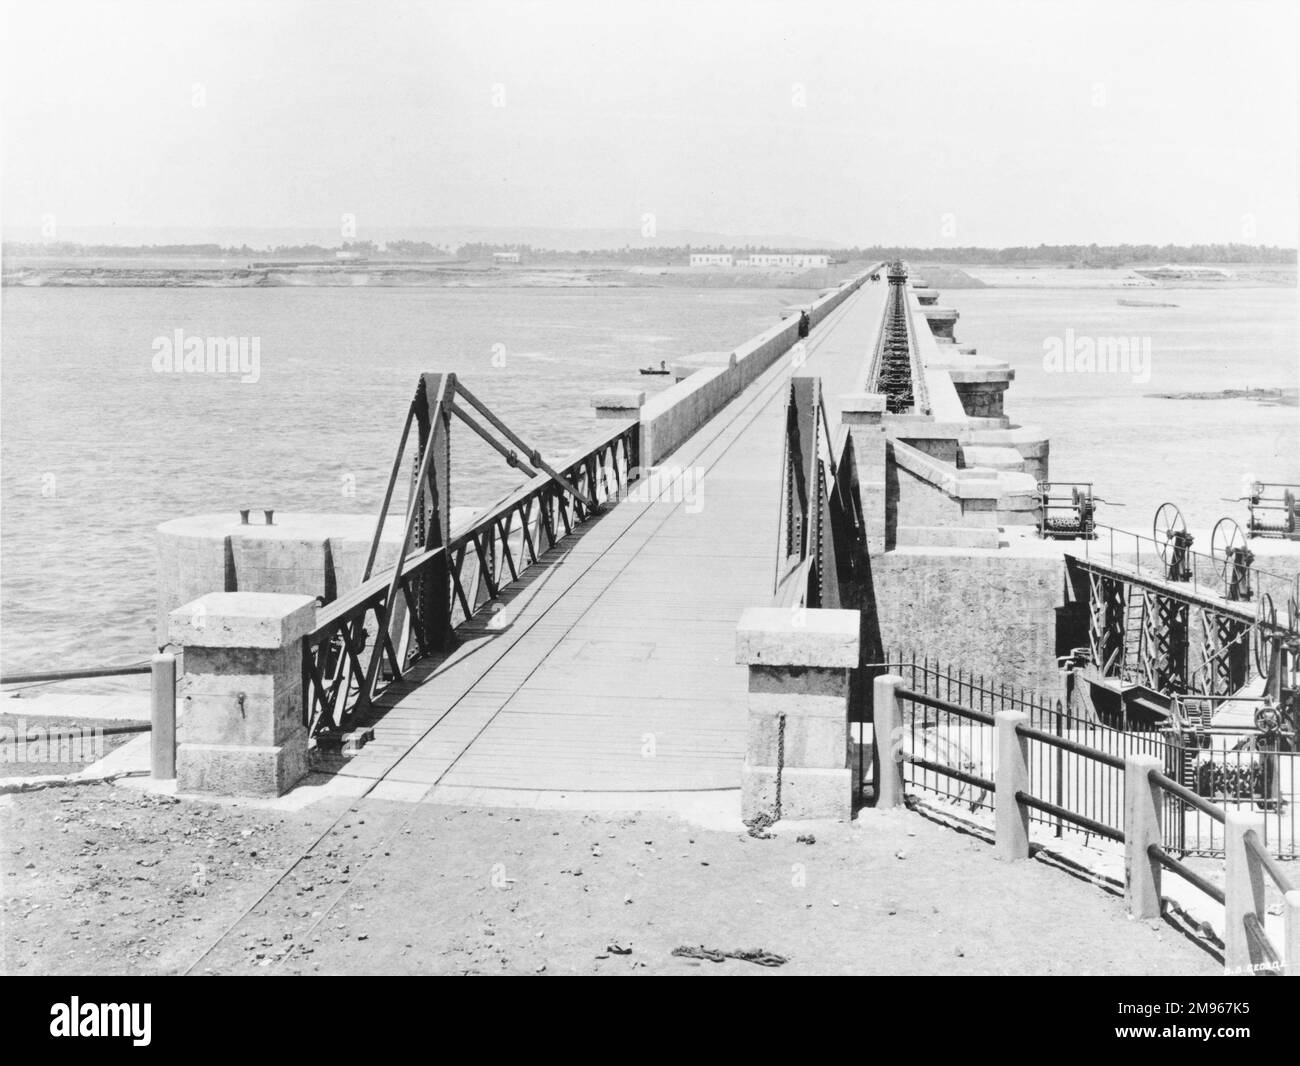 Roadway and swing bridge over lock on the Assiut or Asyut Barrage on the River Nile in Egypt, about 350 miles downstream from the Aswan Dam. Stock Photo